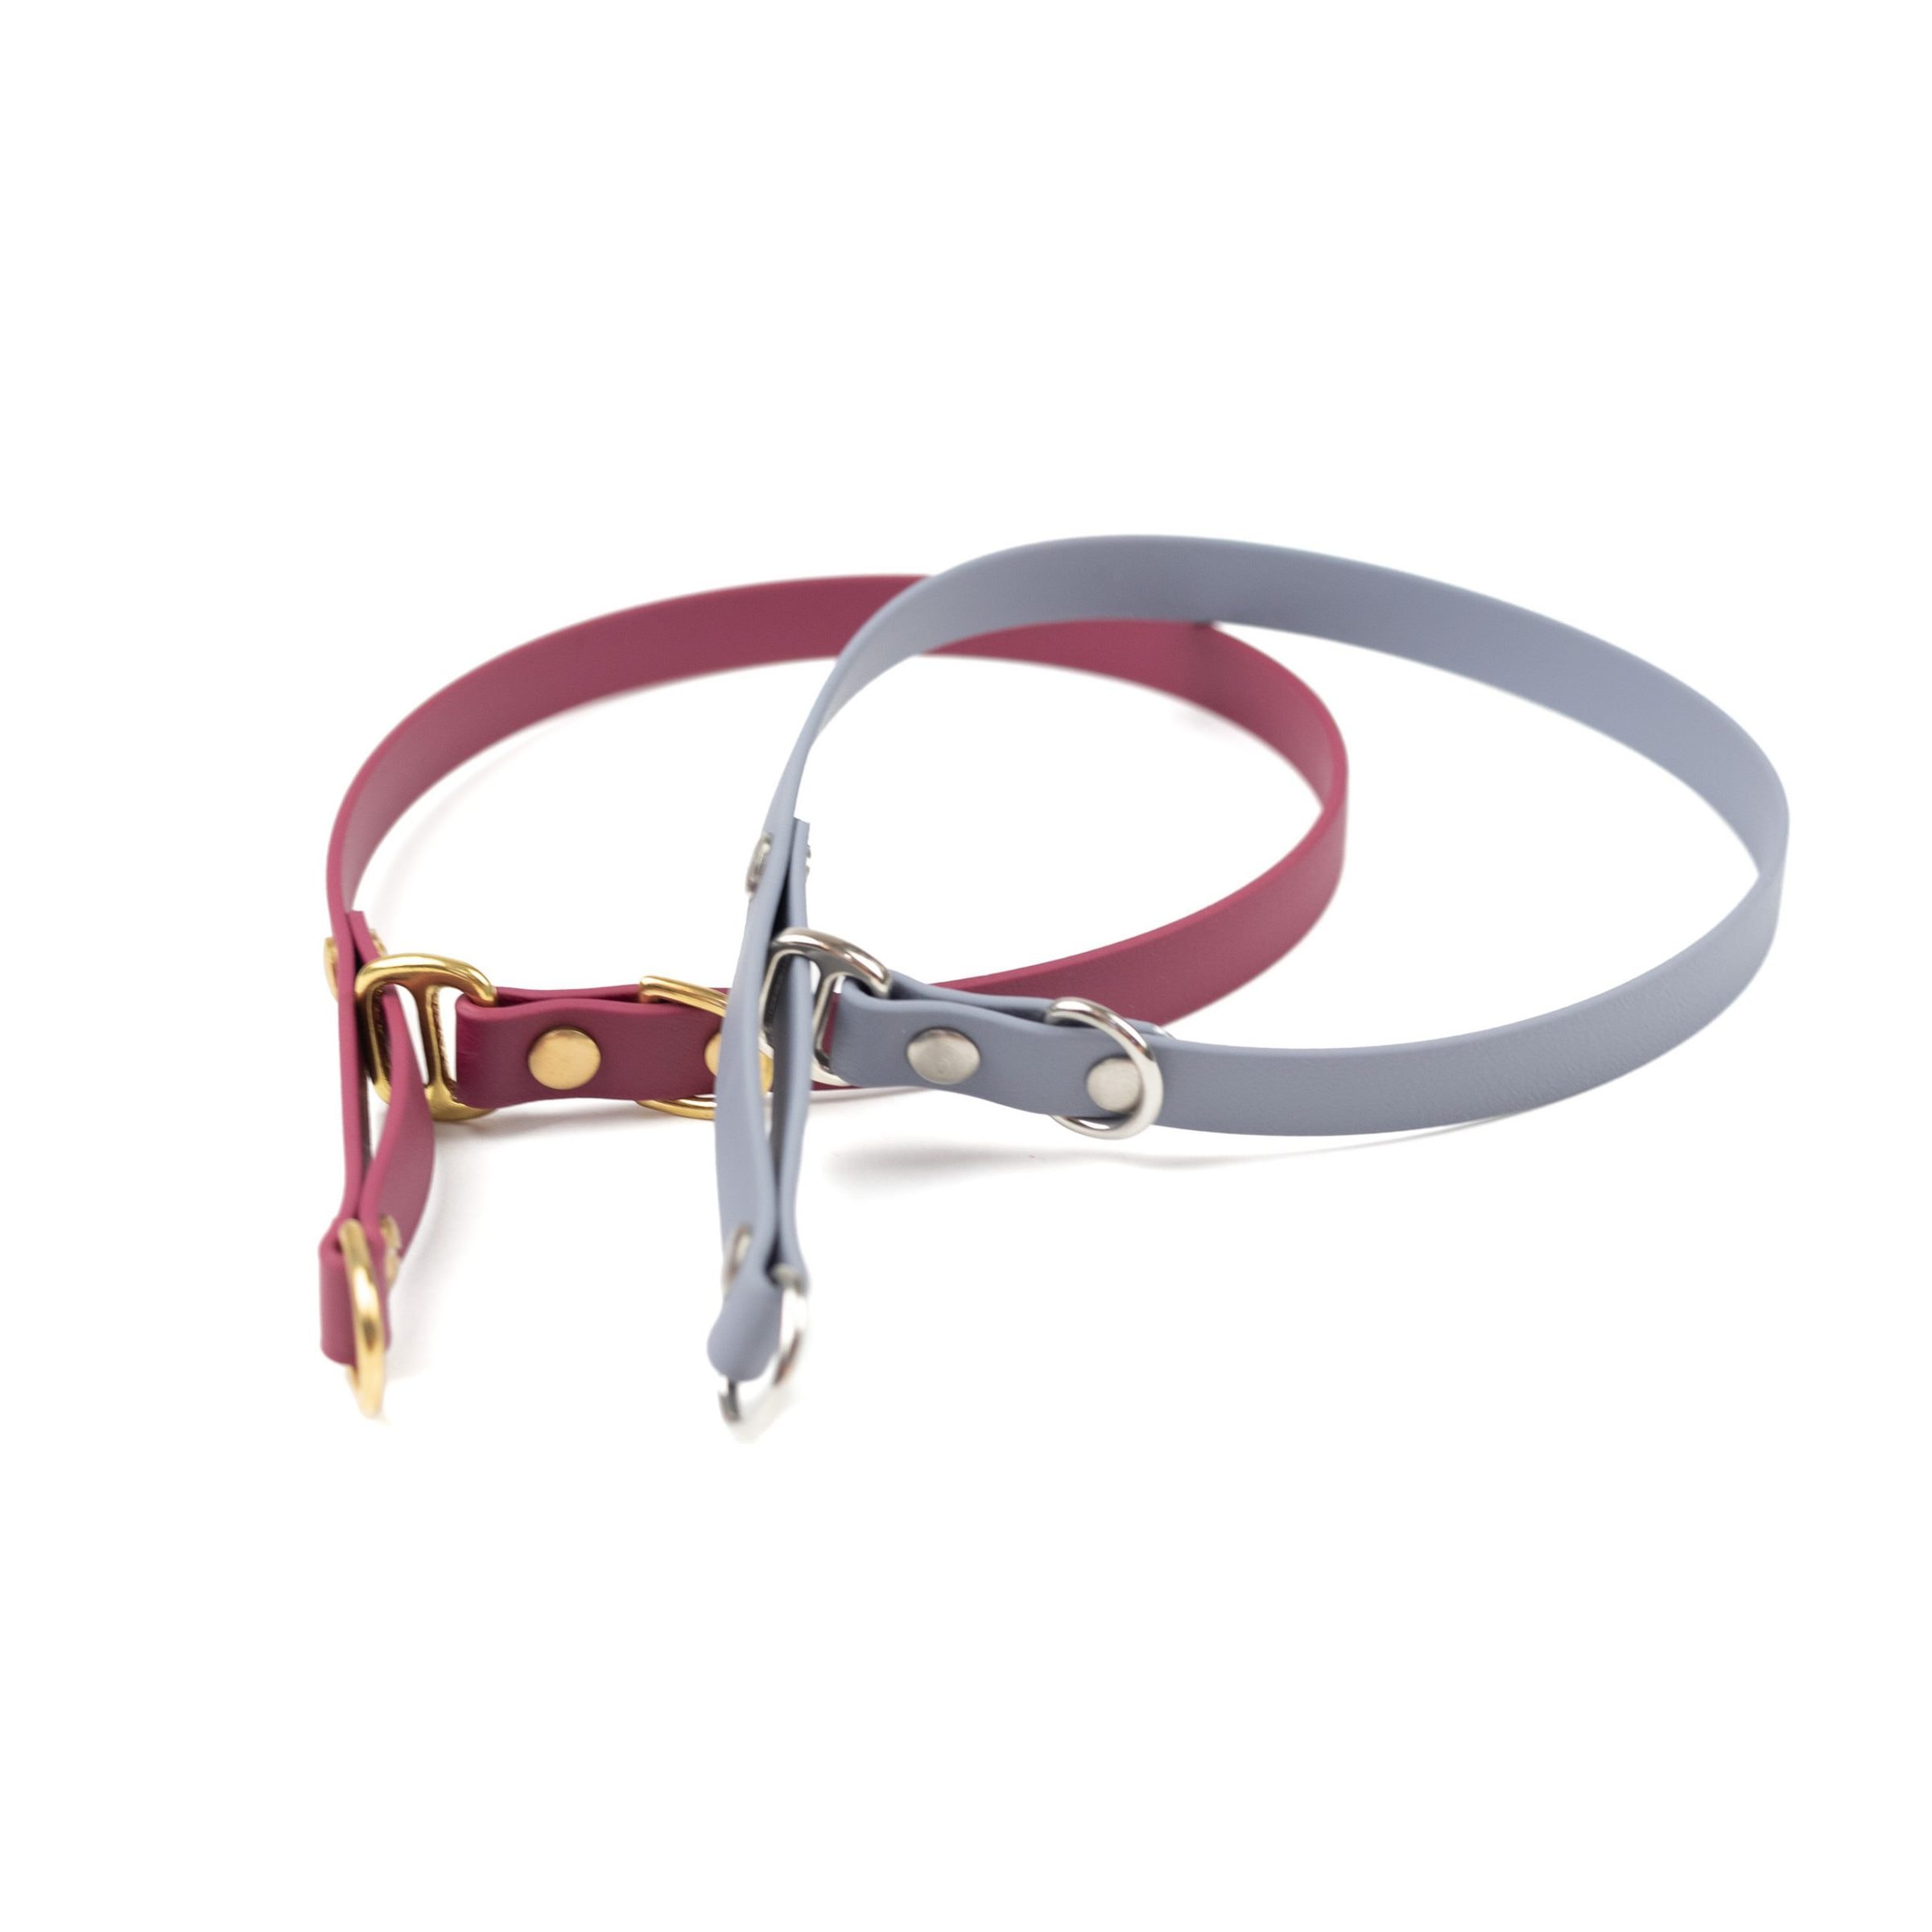 burgundy and grey 5/8" classic limited slip collar in solid brass and stainless steel